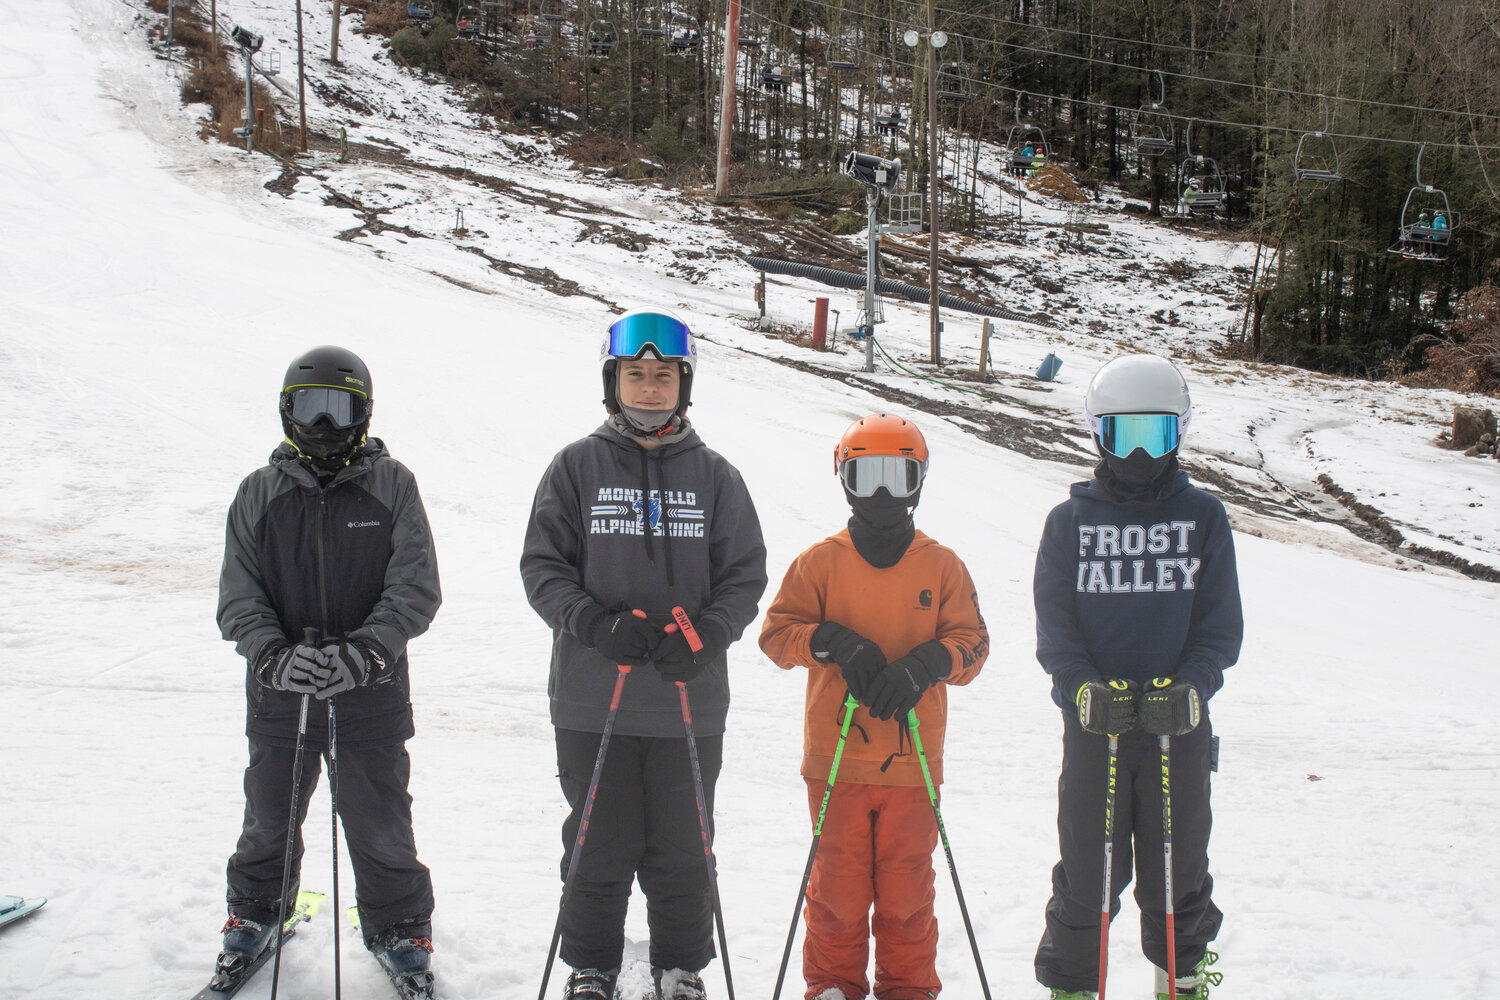 Young skiers from Monticello Central School District at Holiday Mtn., from left to right, Carson Petrowski, Giuliano Francisco, Christian Bastone and Santino Haffner.